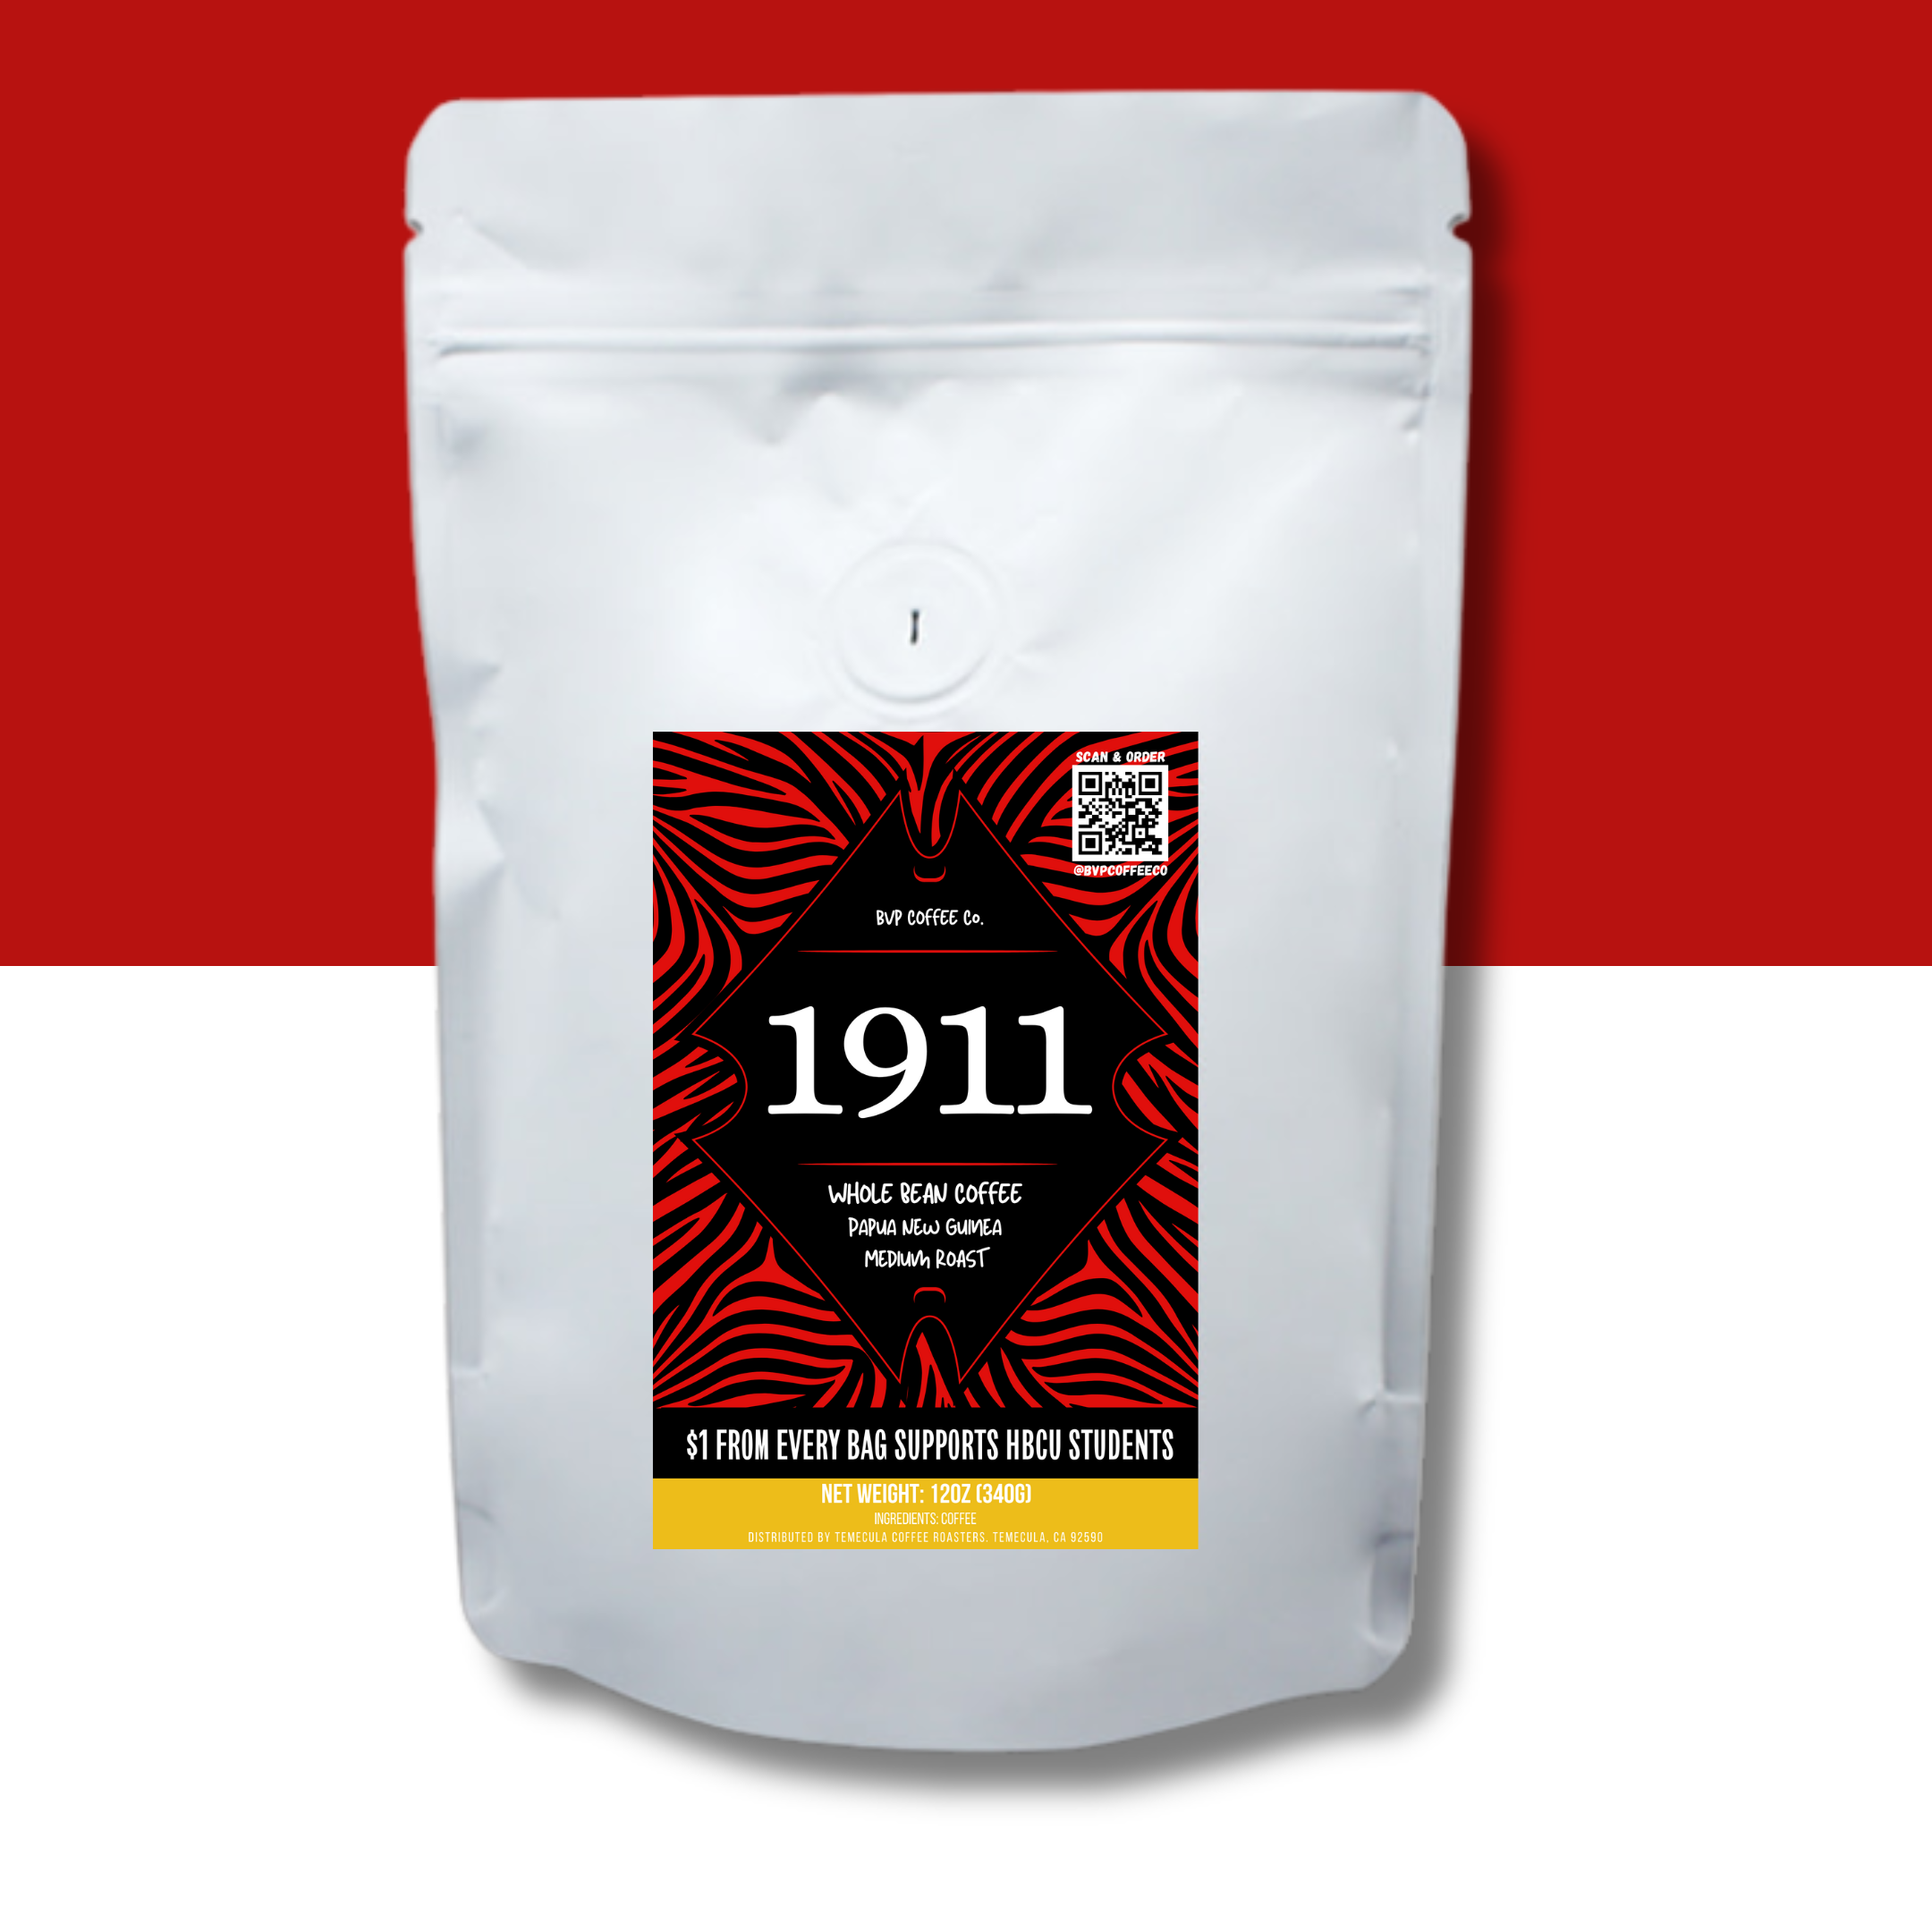 Black Fraternity Gifts | 1911 | Papua New Guinea | Whole Bean Coffee